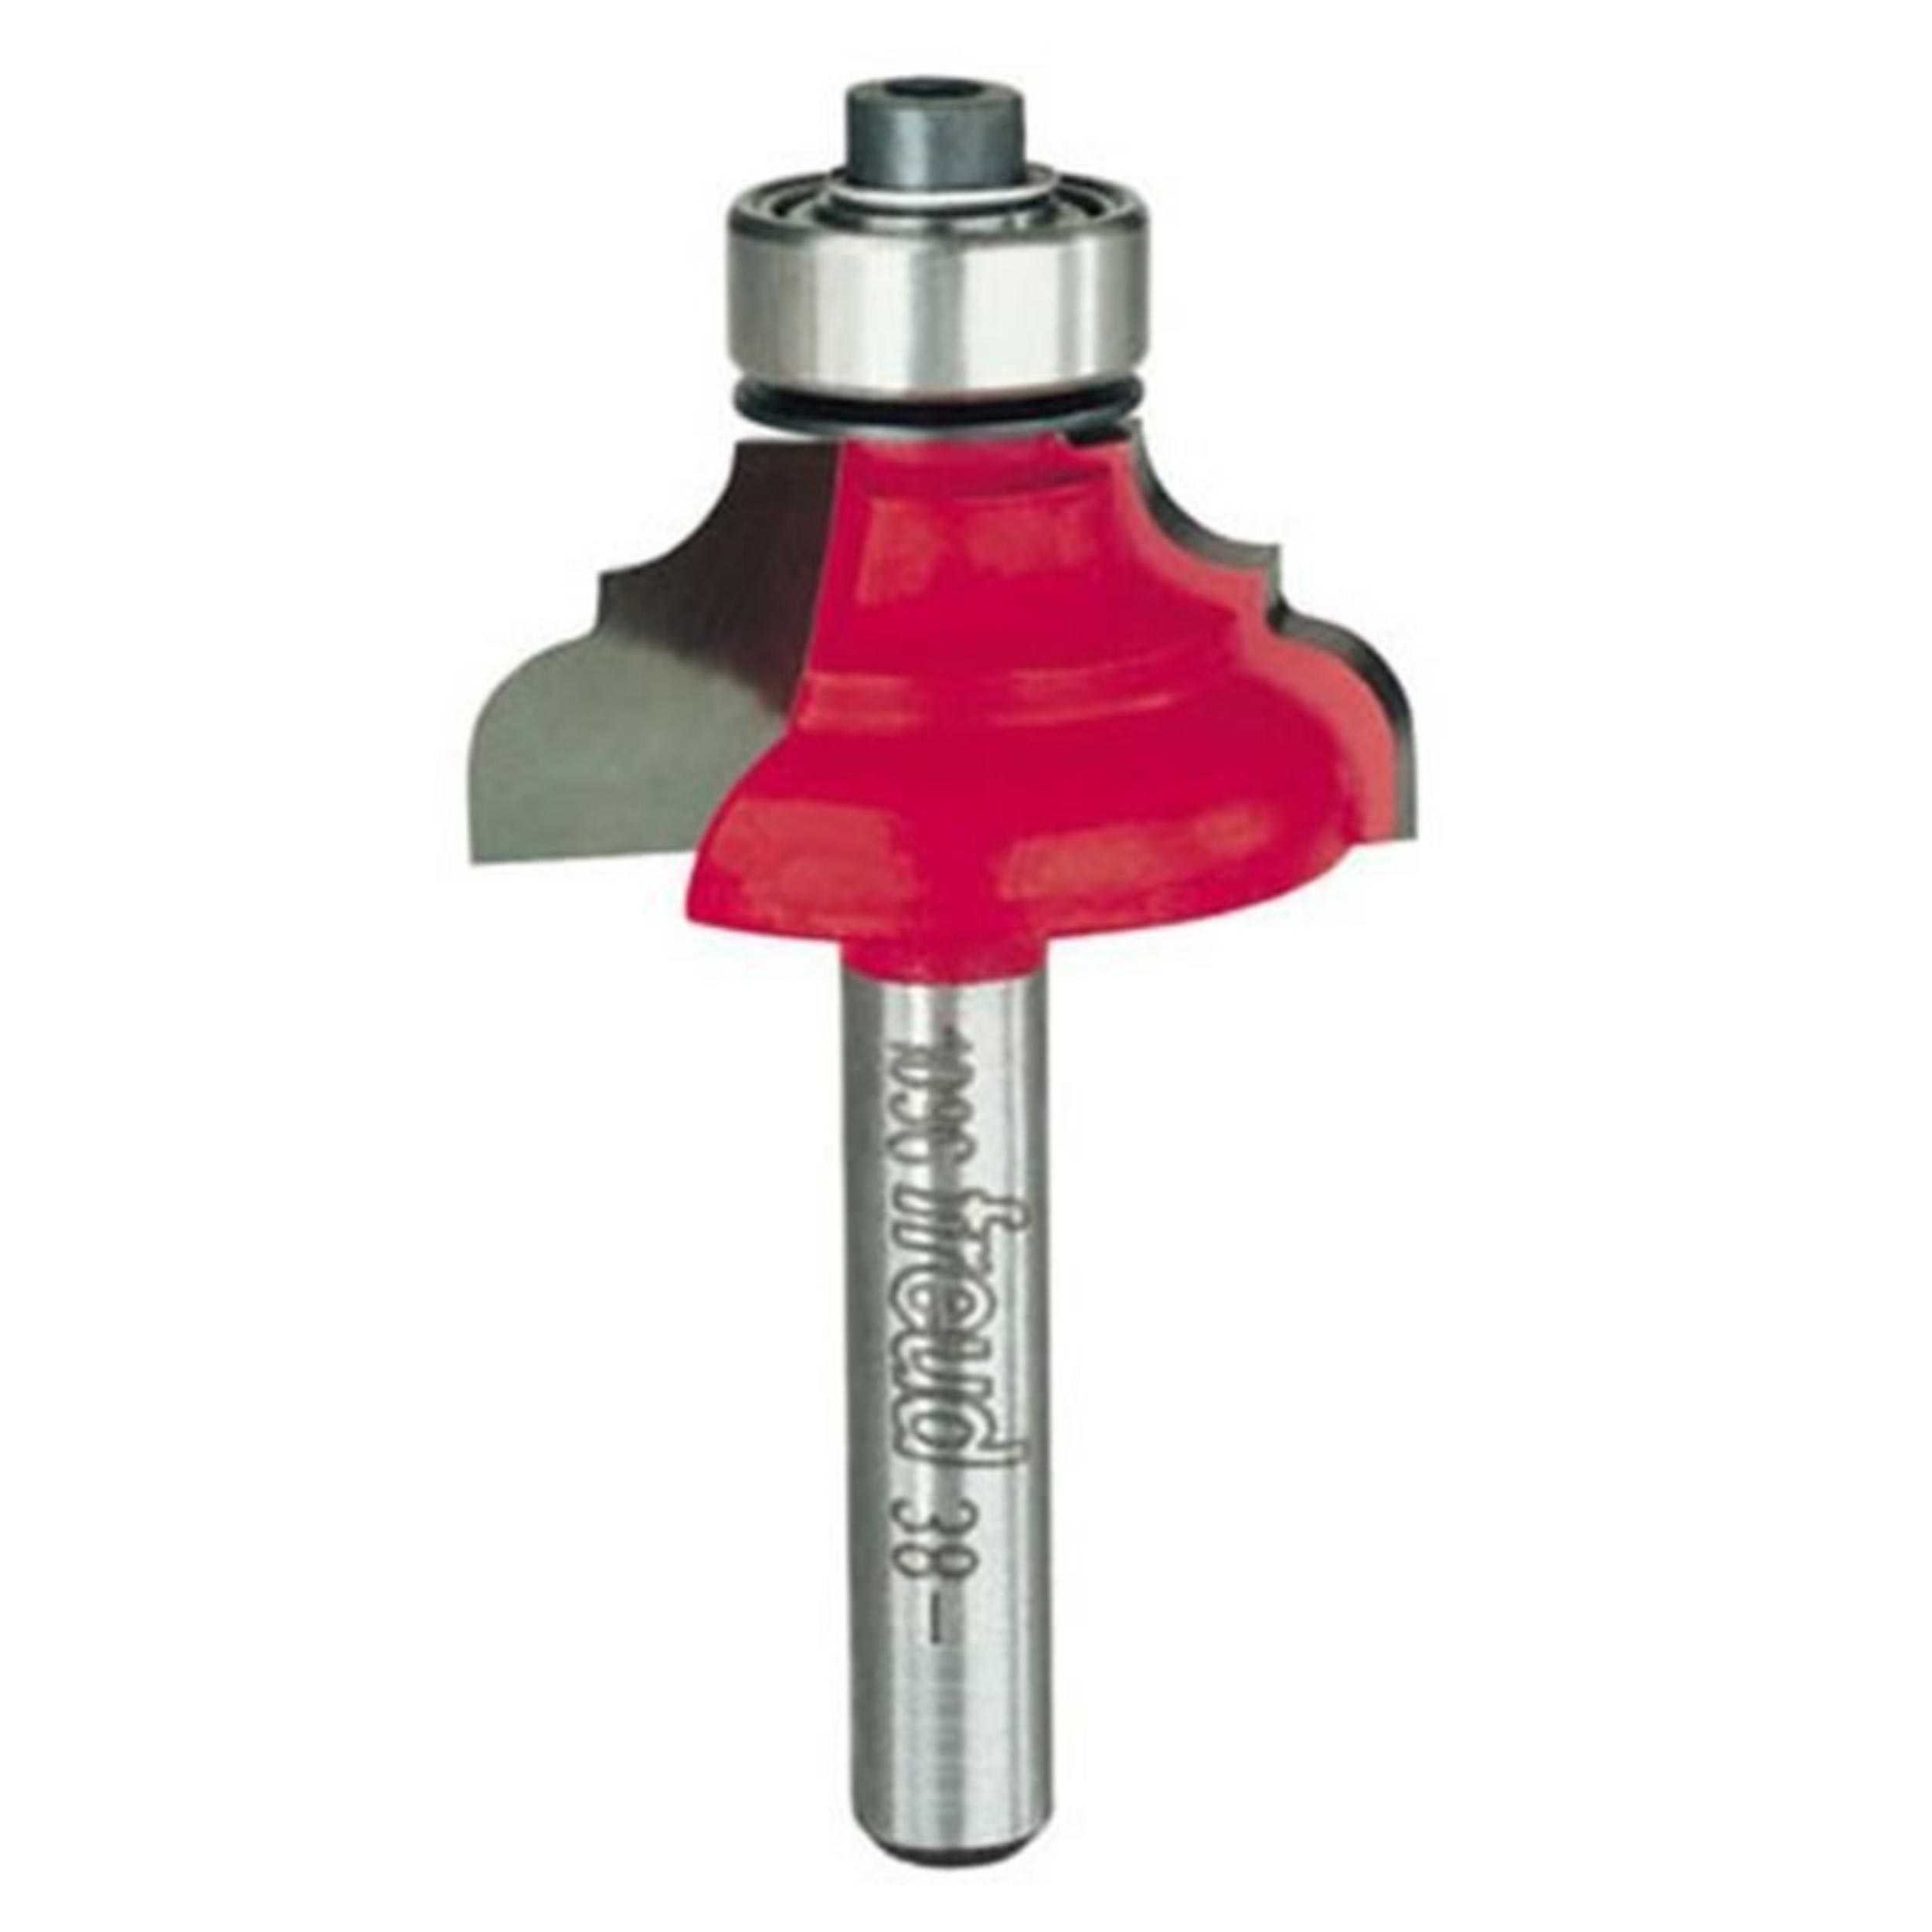 38-613 Classical Cove And Round Router Bit 1/4" Sh 1-3/8" D 3/4" Cl 1/4" R